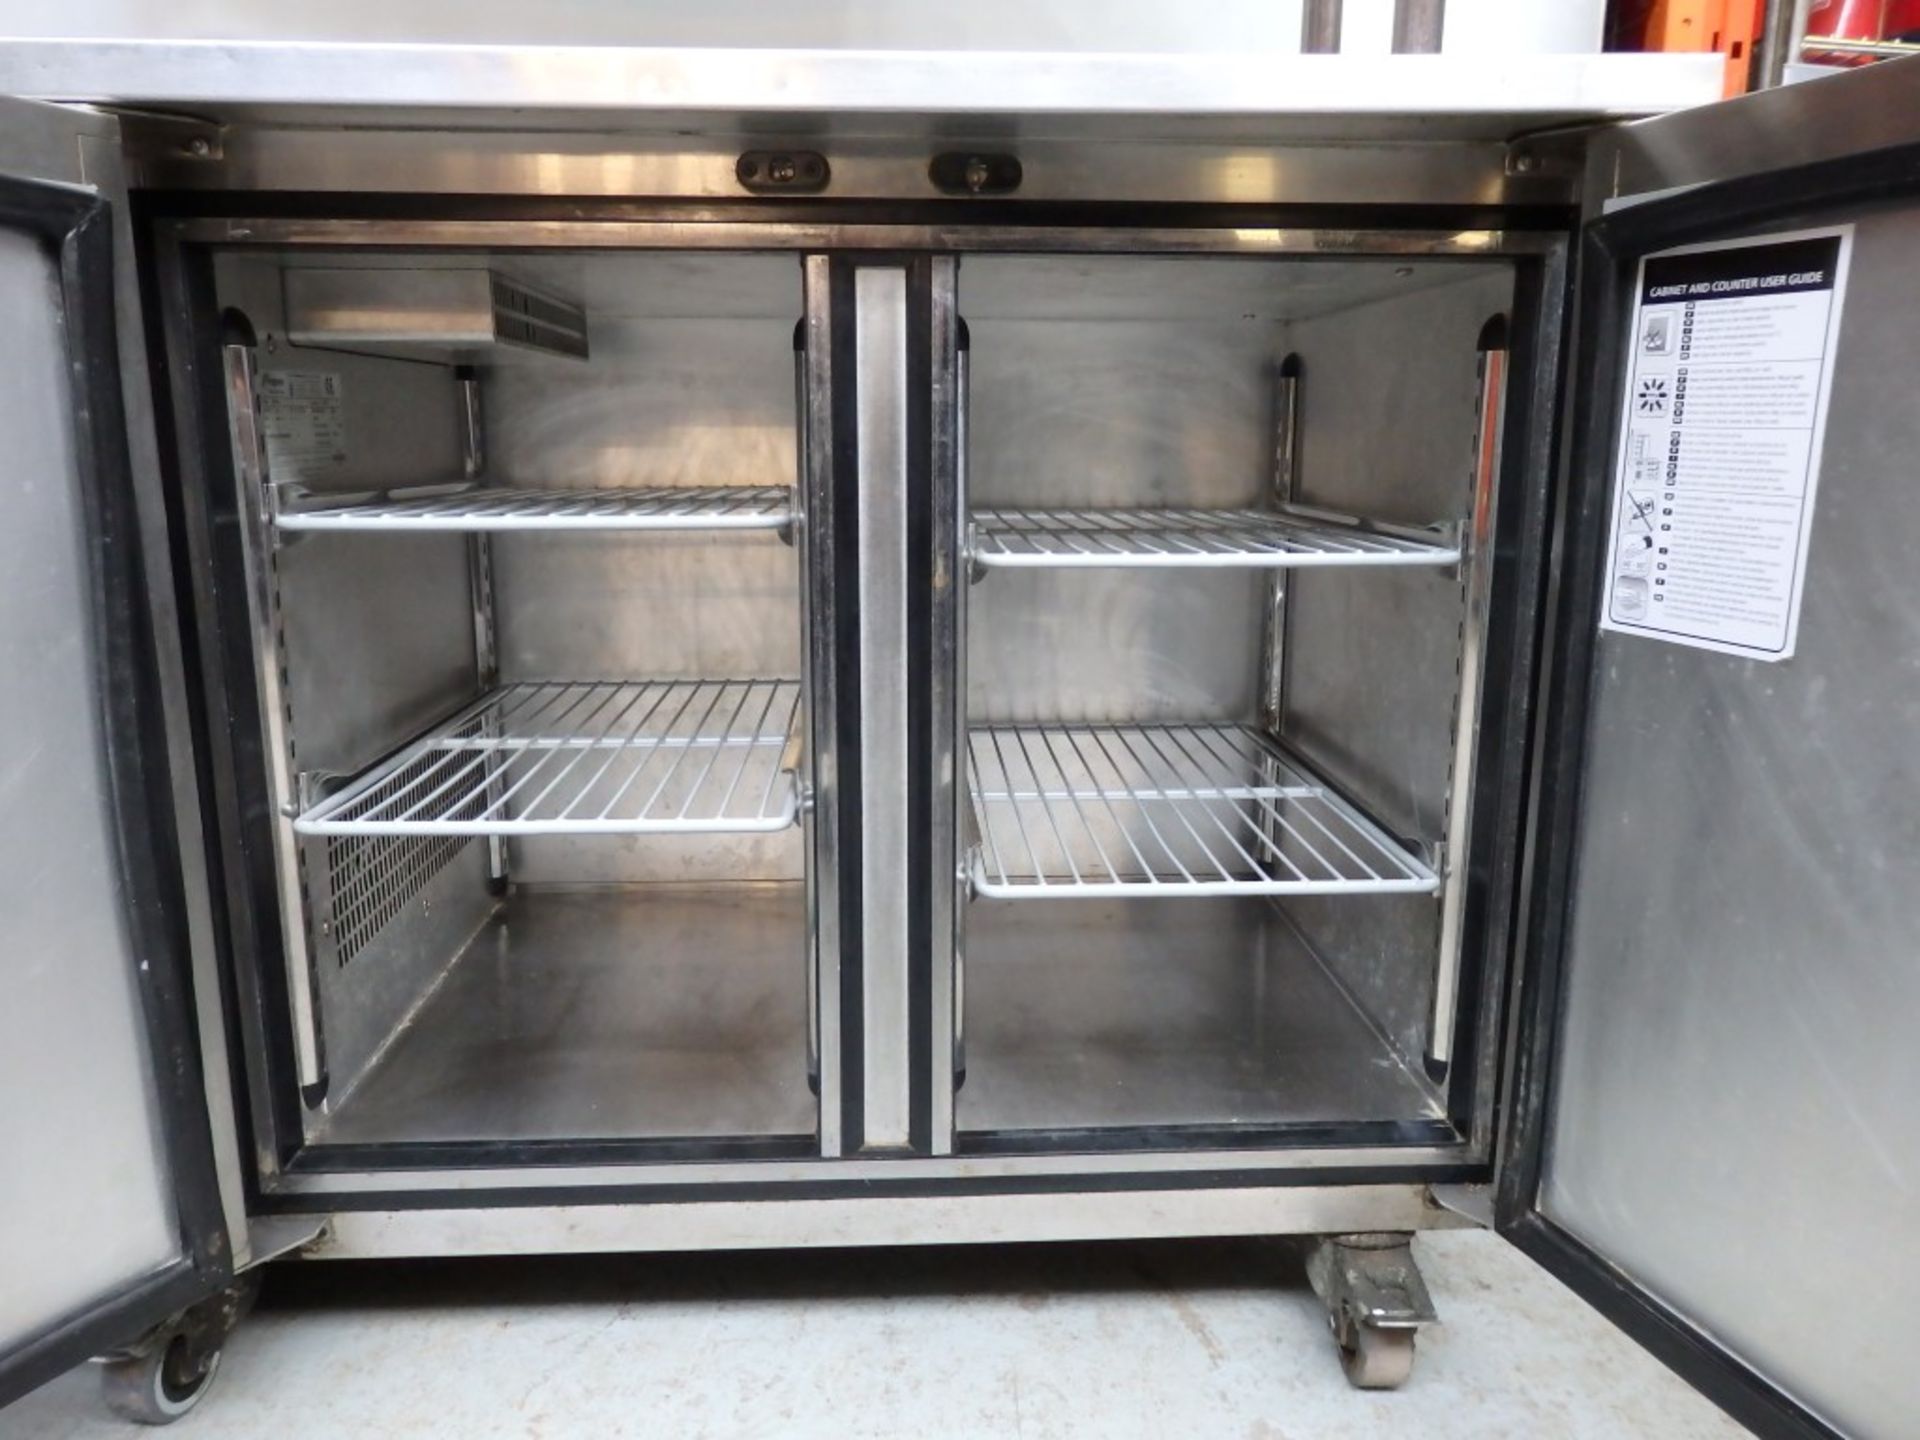 1 x Foster Pro Gastro Refrigerator - On Castors With Overhead Shelving Units - Model PRO1/2L - - Image 6 of 15